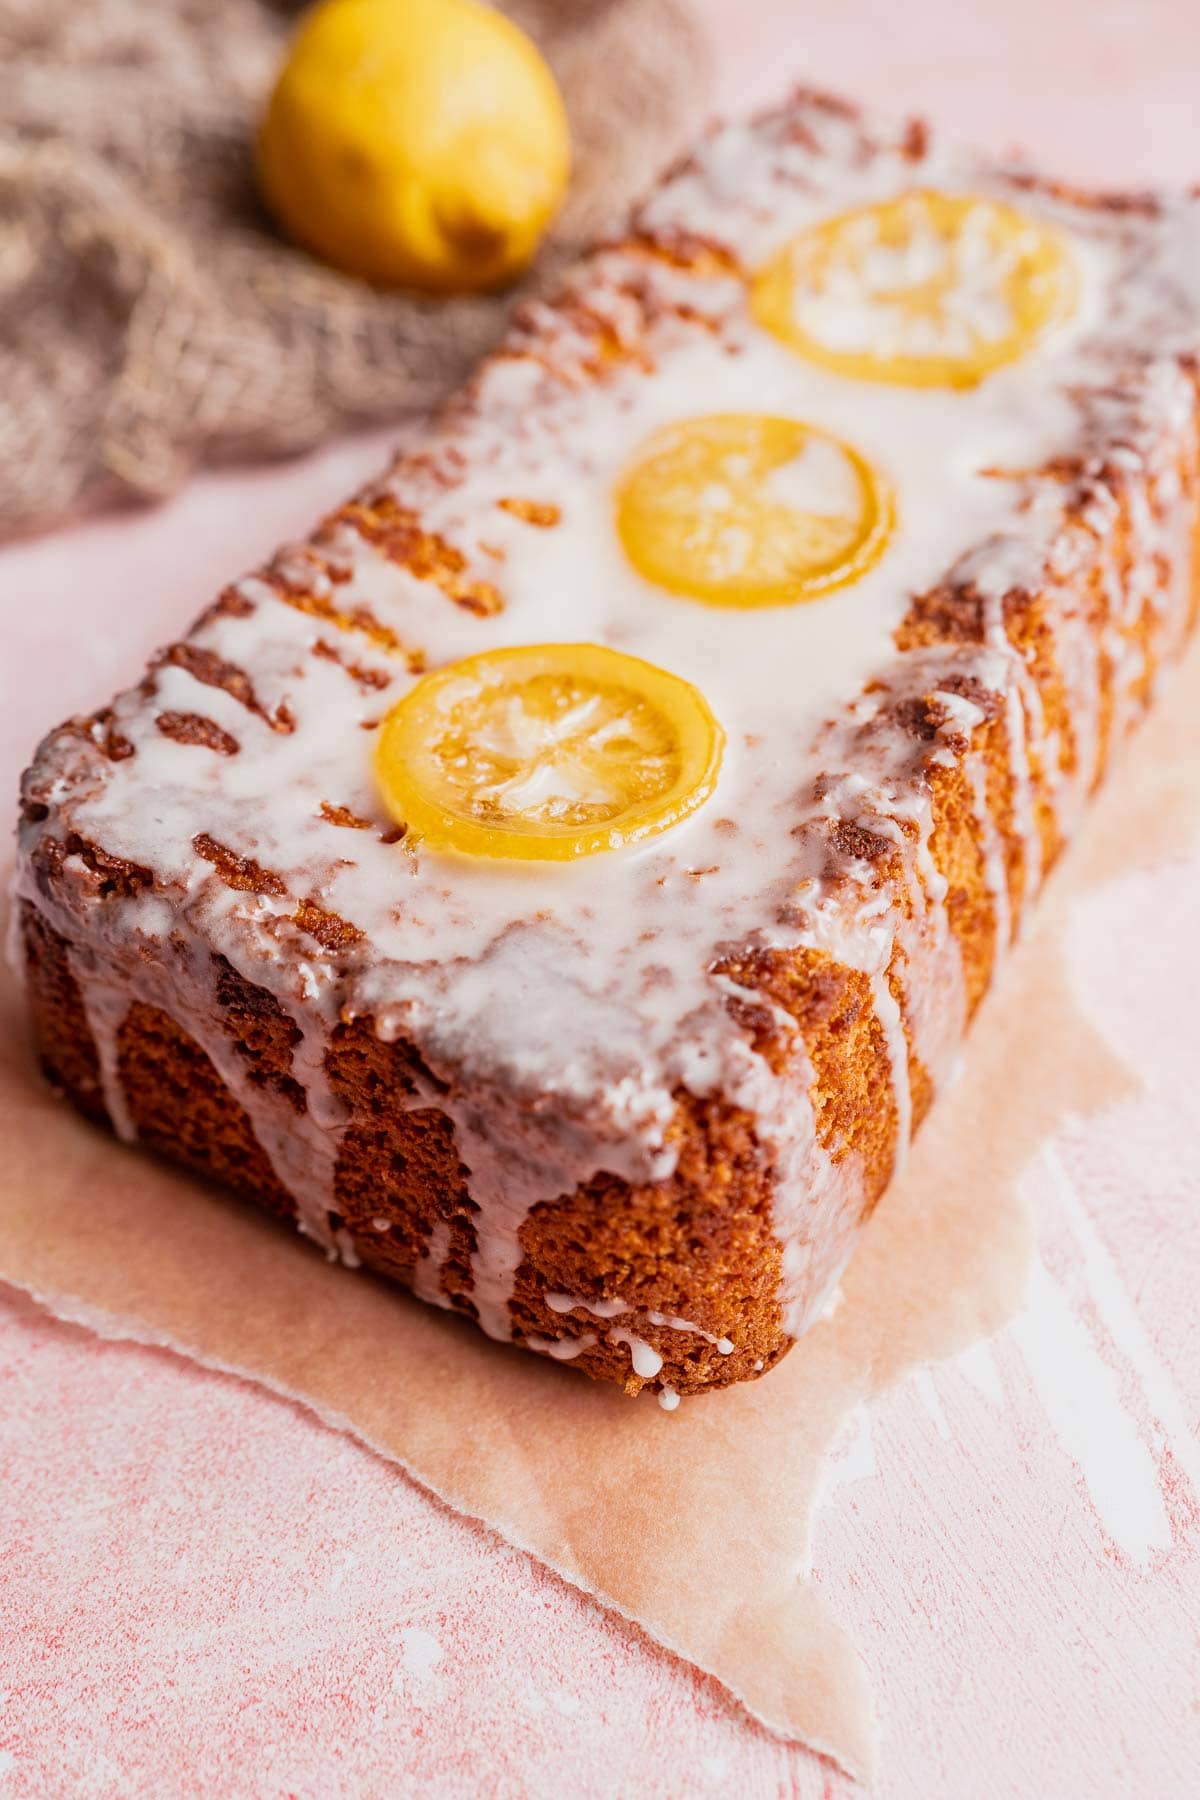 A dark yellow loaf cake drizzled with white glaze and topped with slices of lemon.